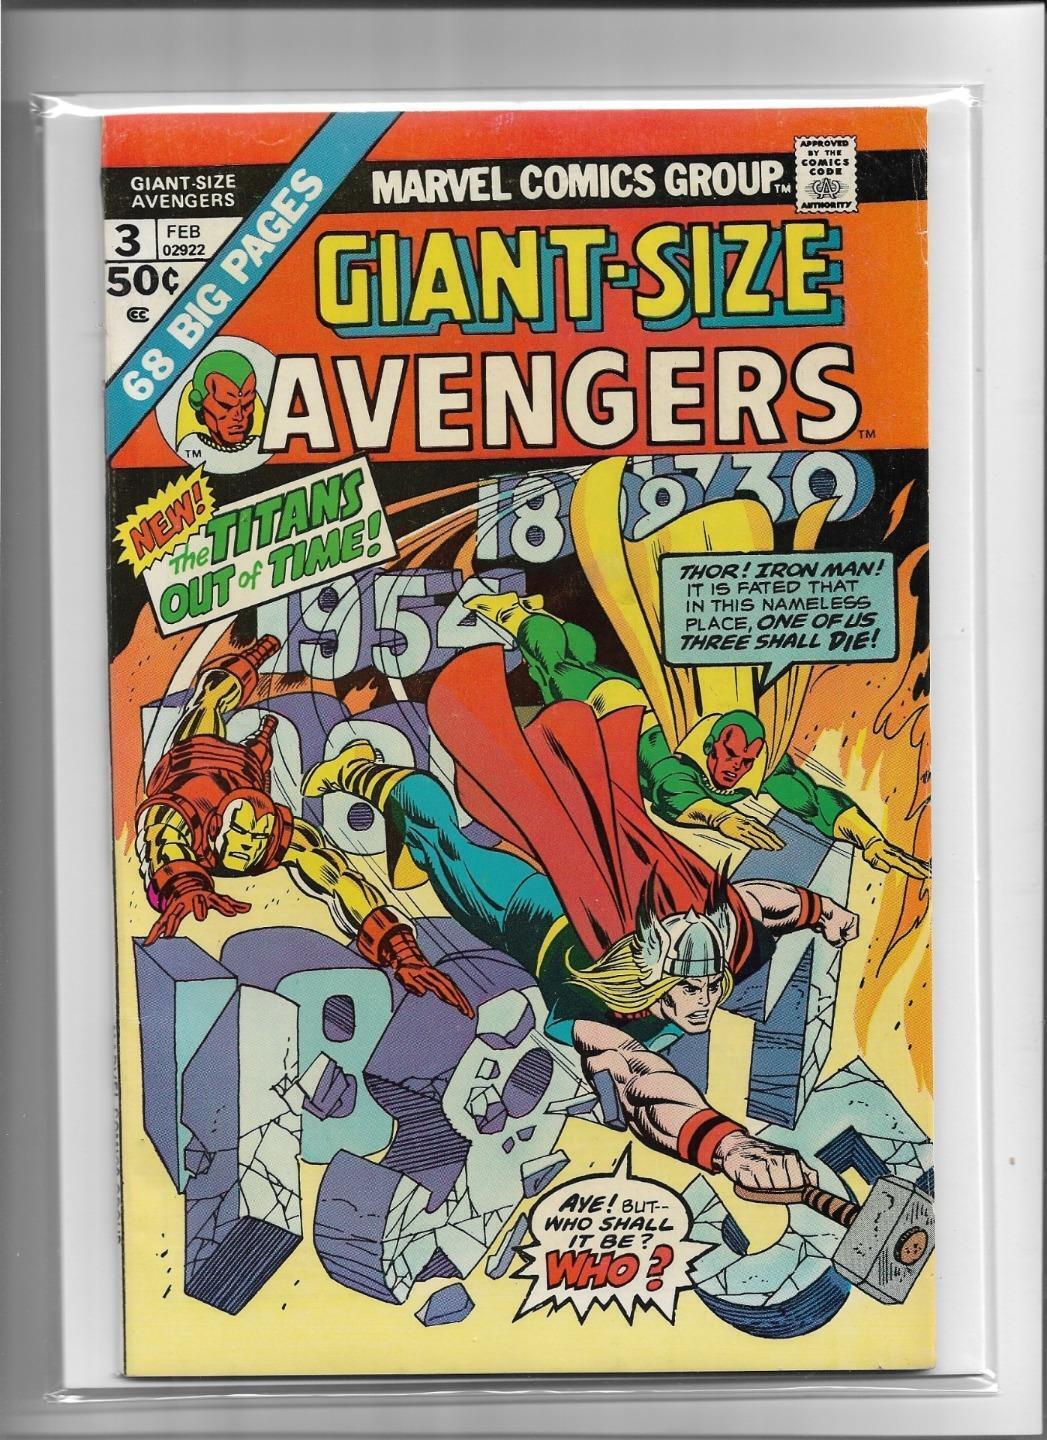 GIANT-SIZE AVENGERS #3 1975 VERY FINE 8.0 4407 IRON MAN THOR VISION